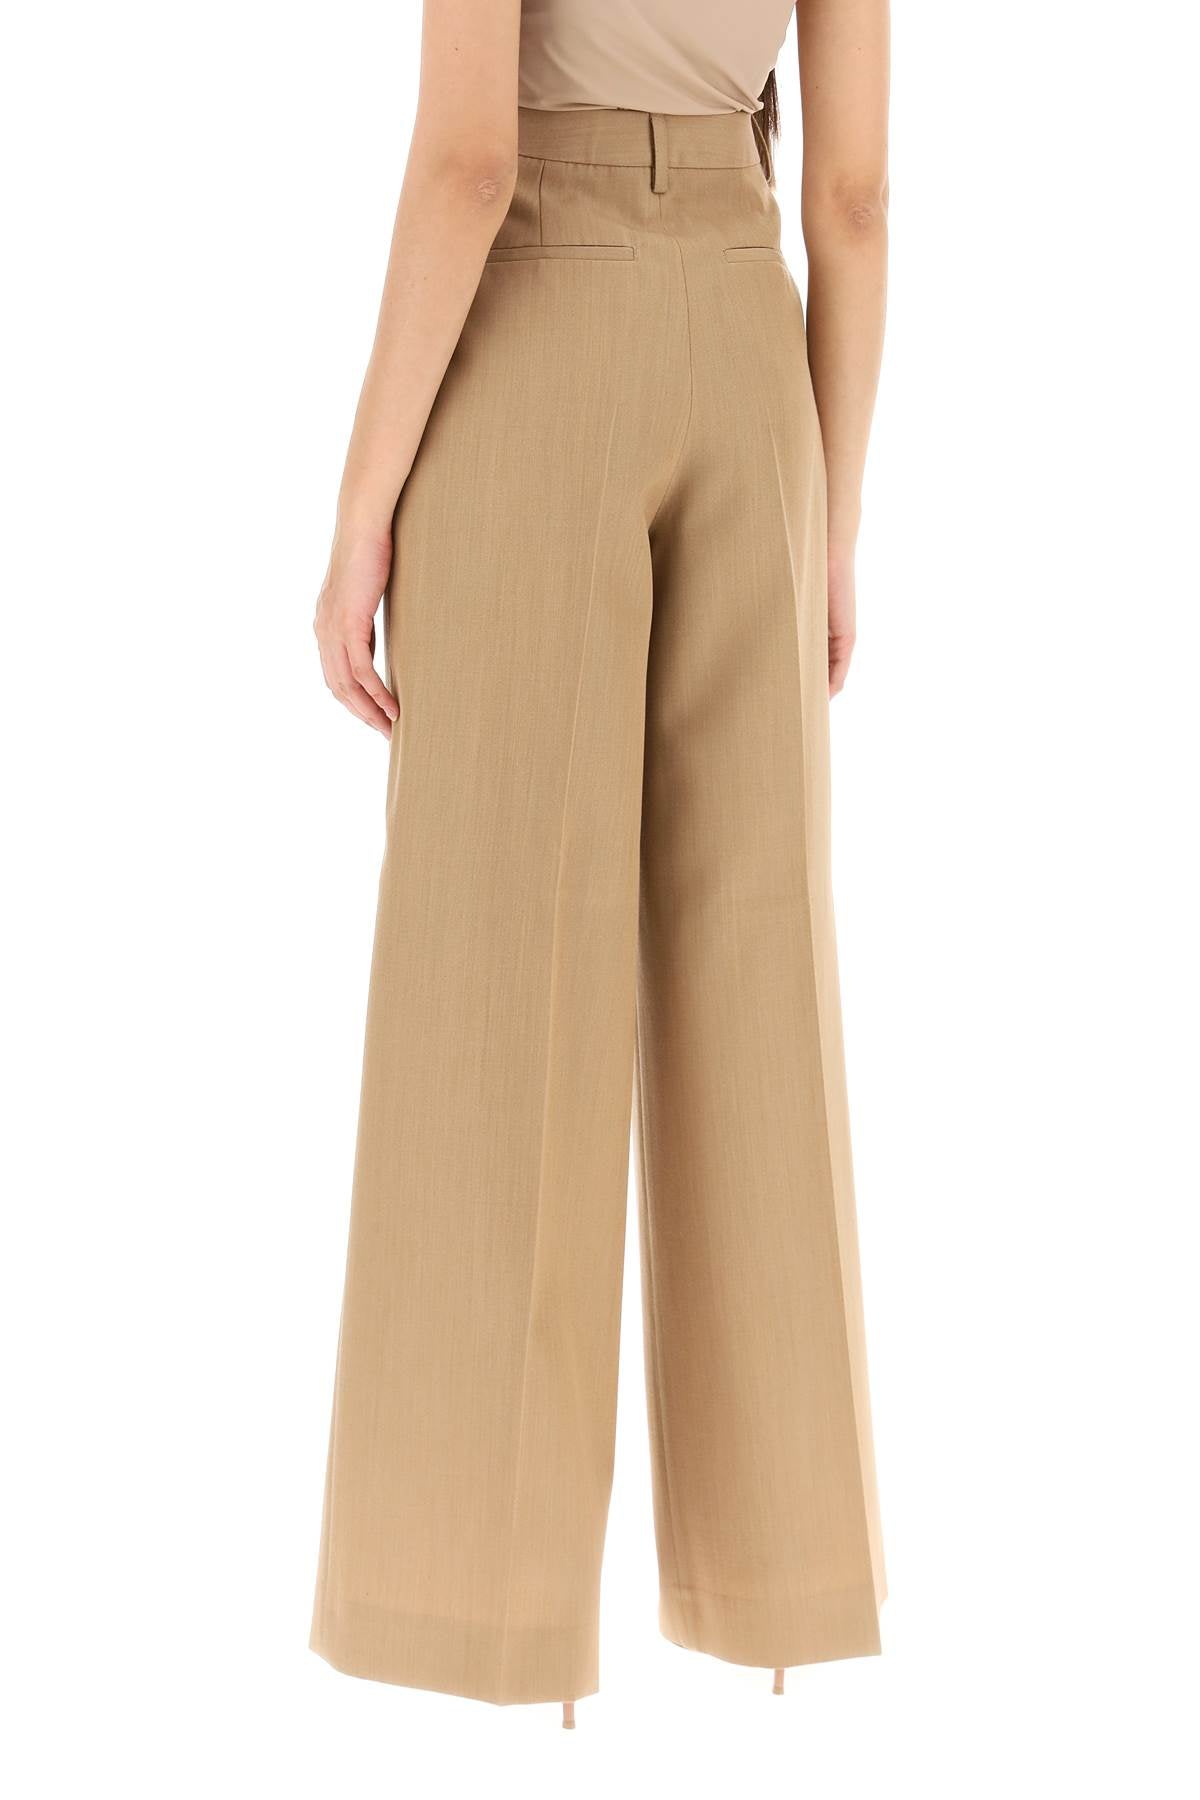 Burberry 'madge' wool pants with darts